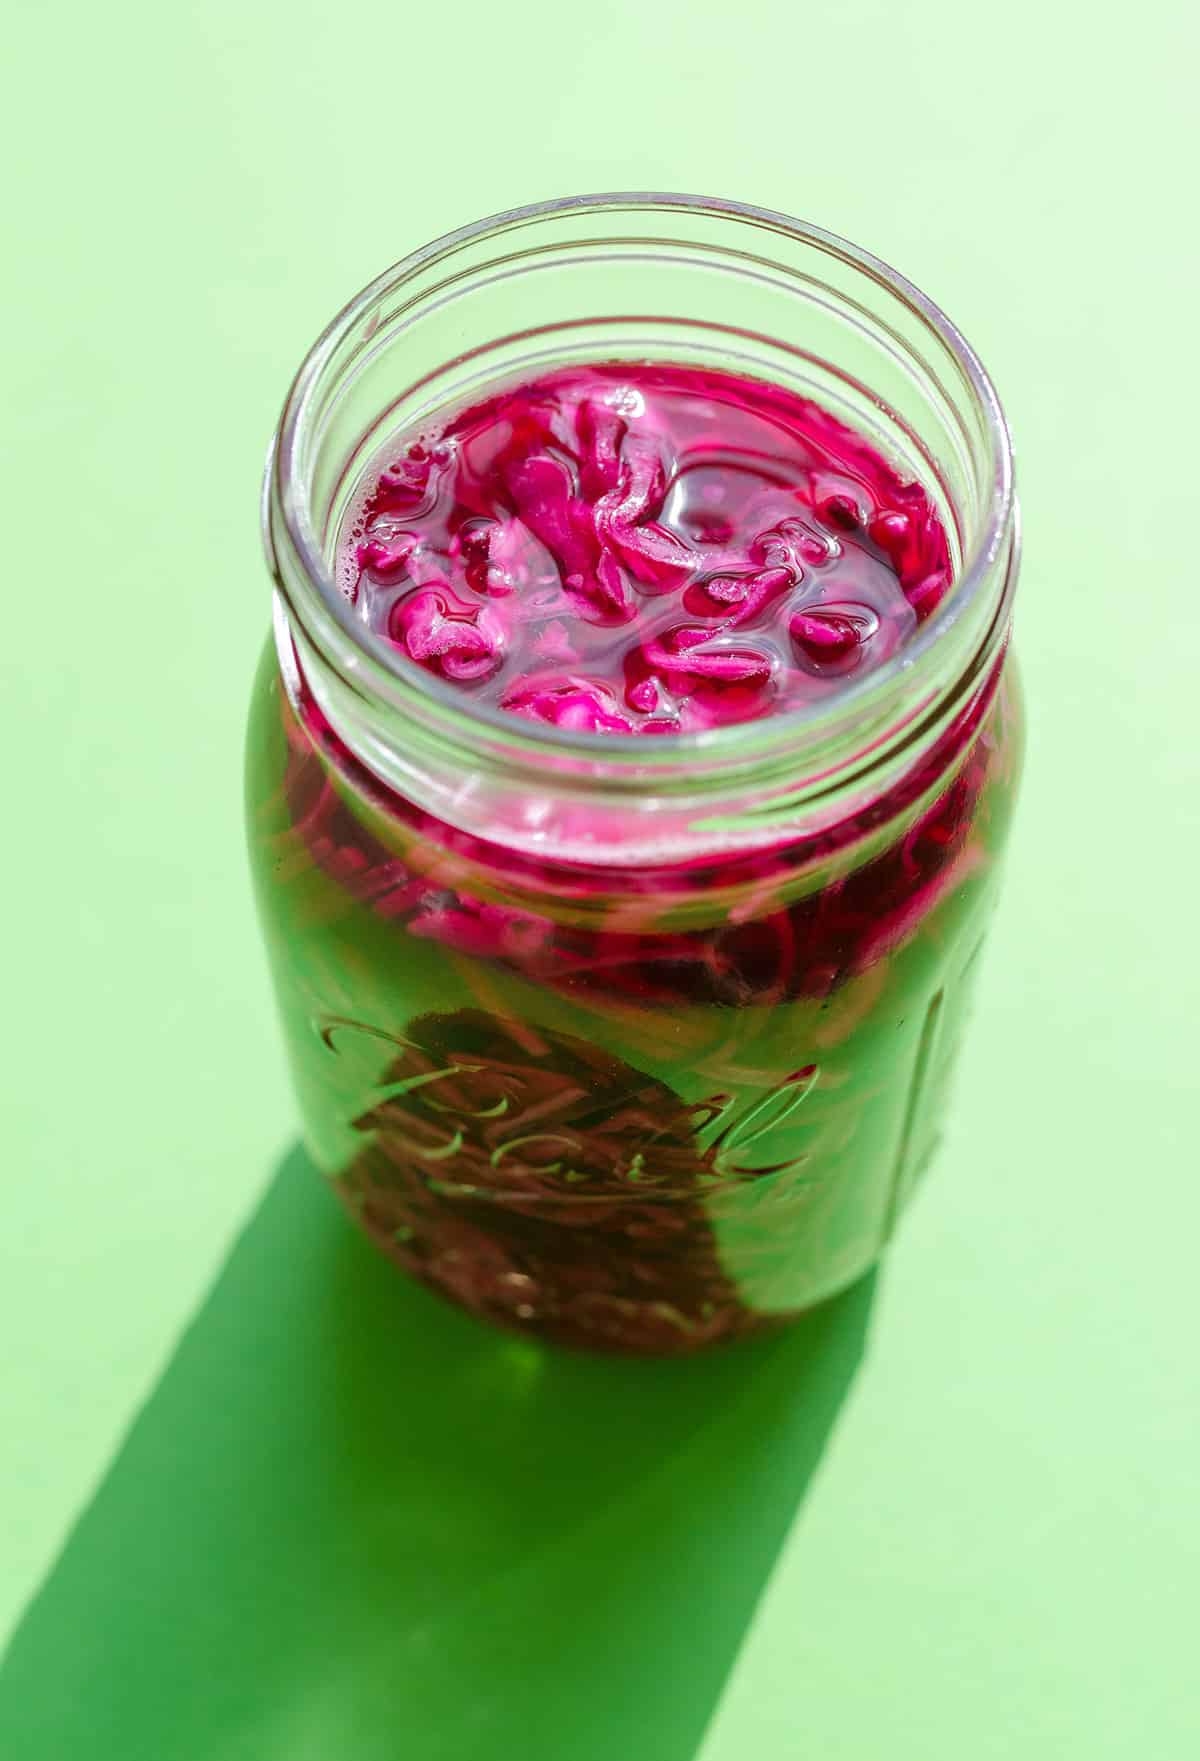 Pickled red cabbage in a jar.